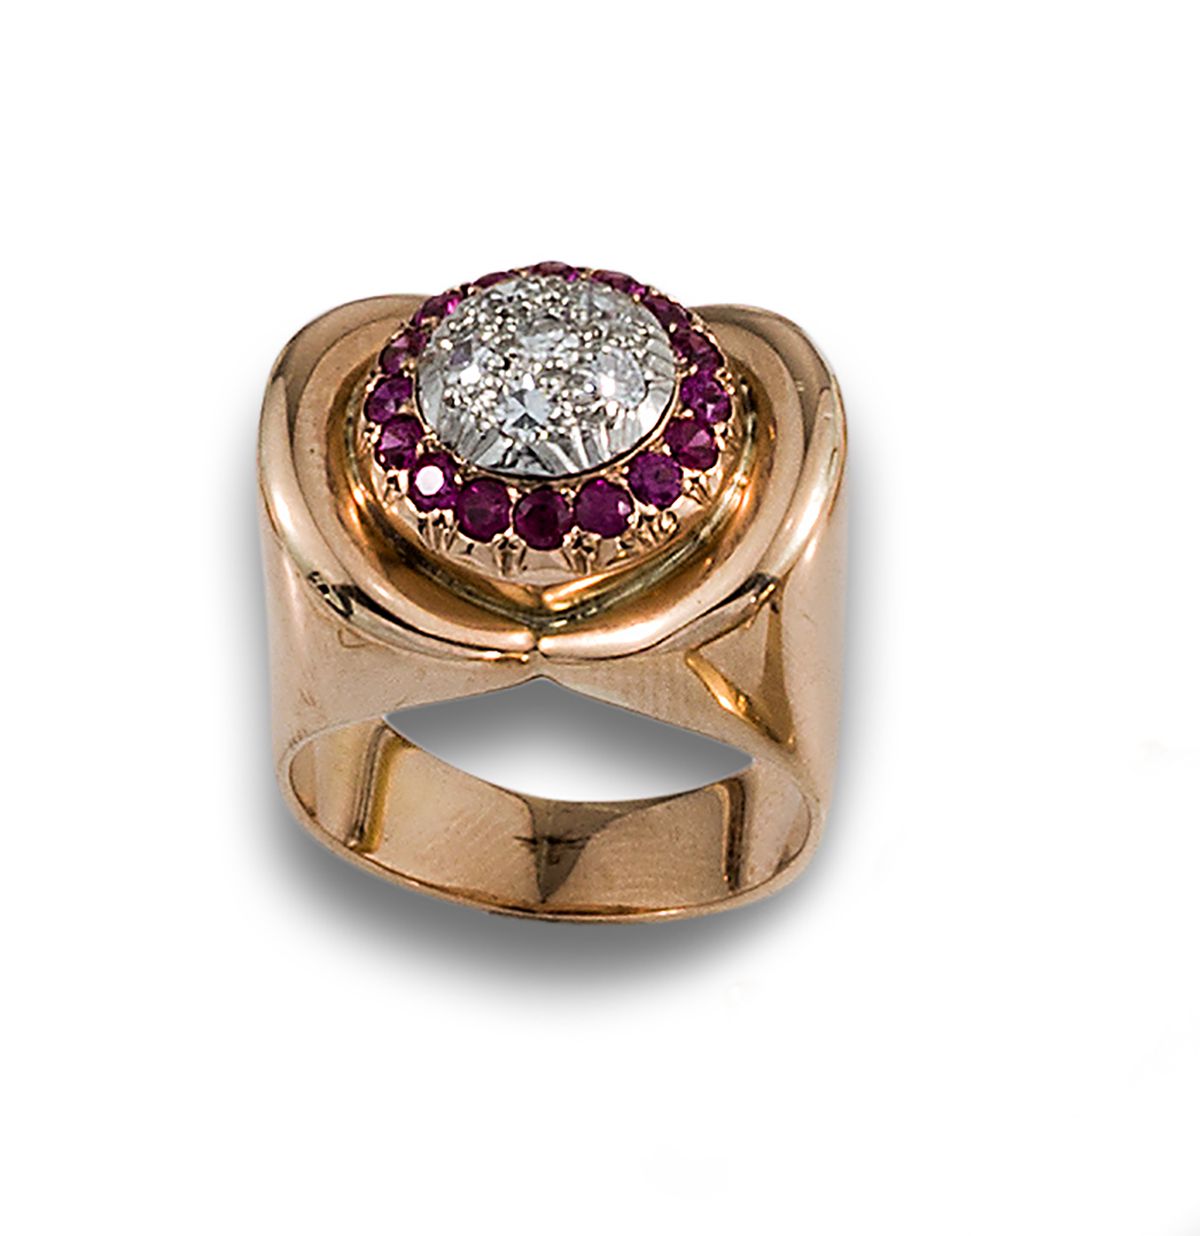 RING CHEVALIER GOLD DIAMONDS RUBIES SYNTHETIC RUBIES Ring Chevalier 18kts rose g&hellip;